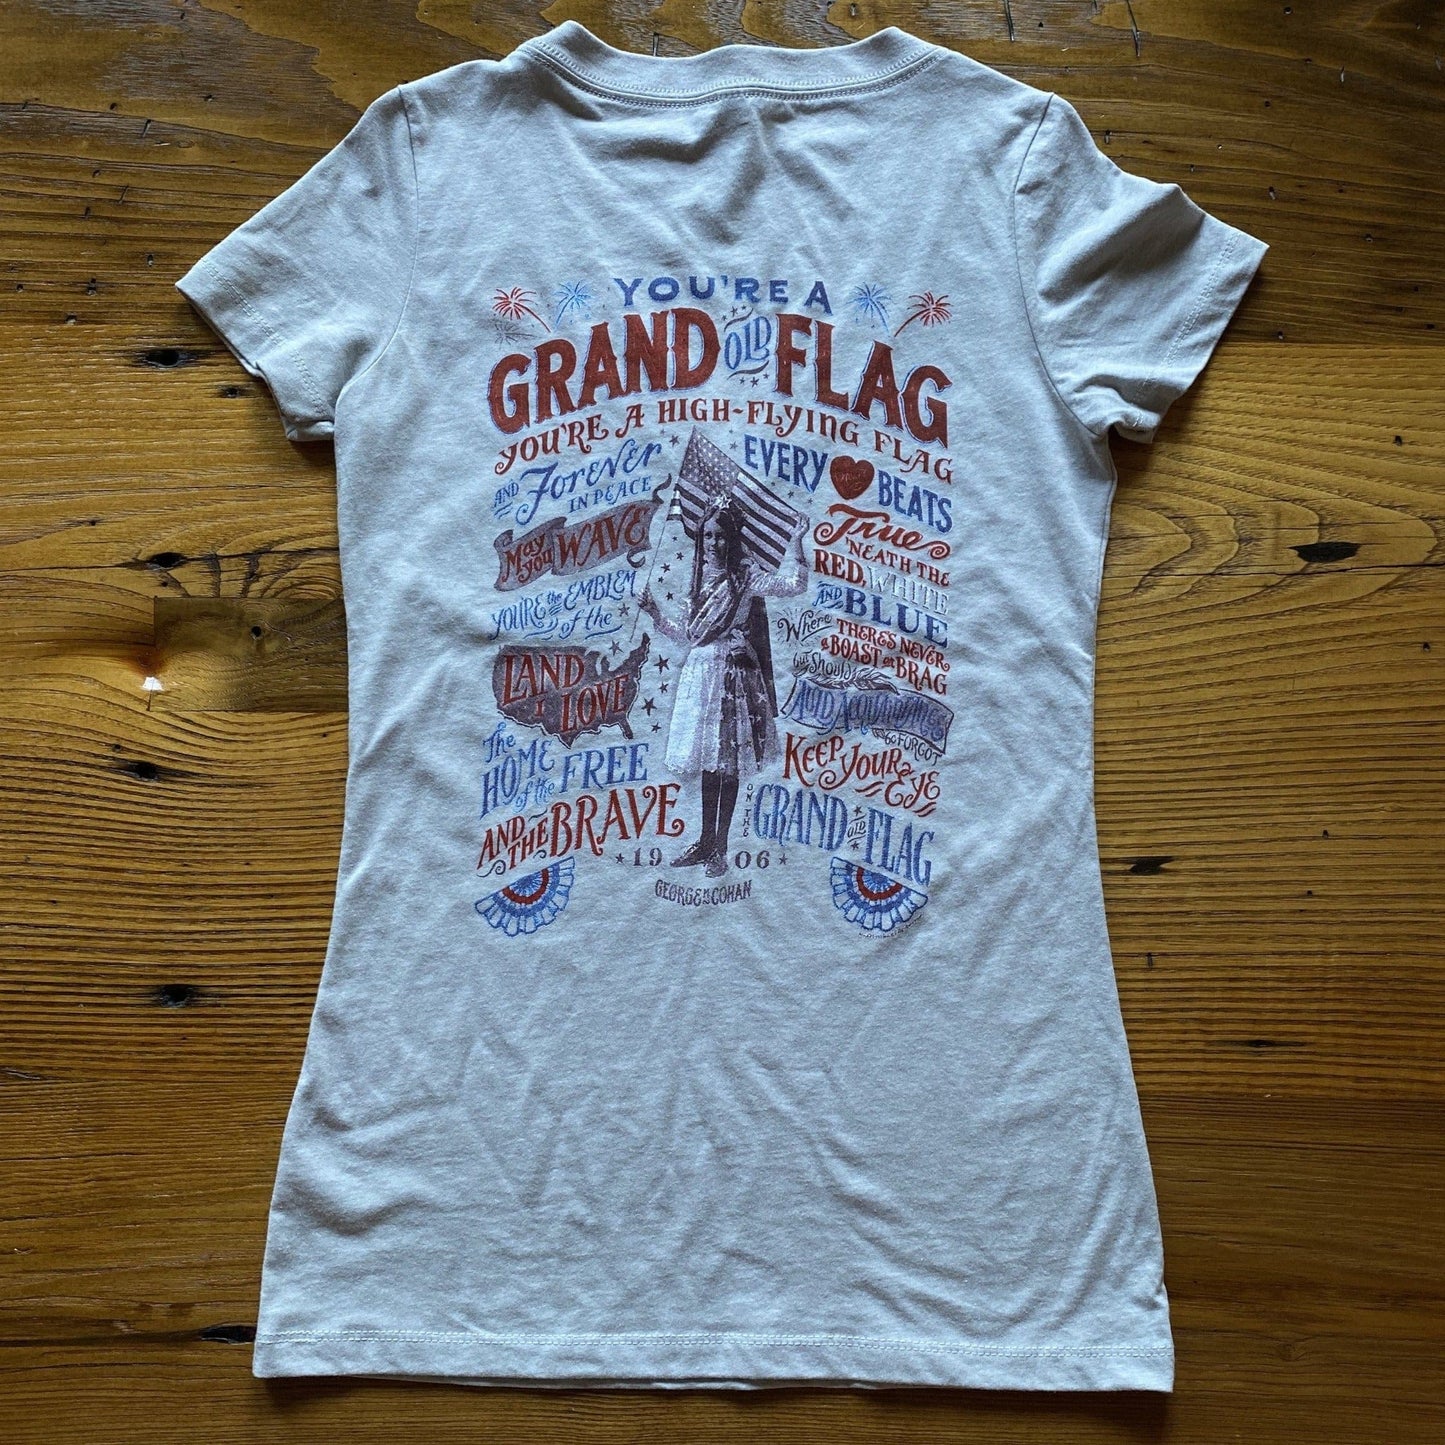 Back of "Grand Old Flag" V-neck shirt from The History List store